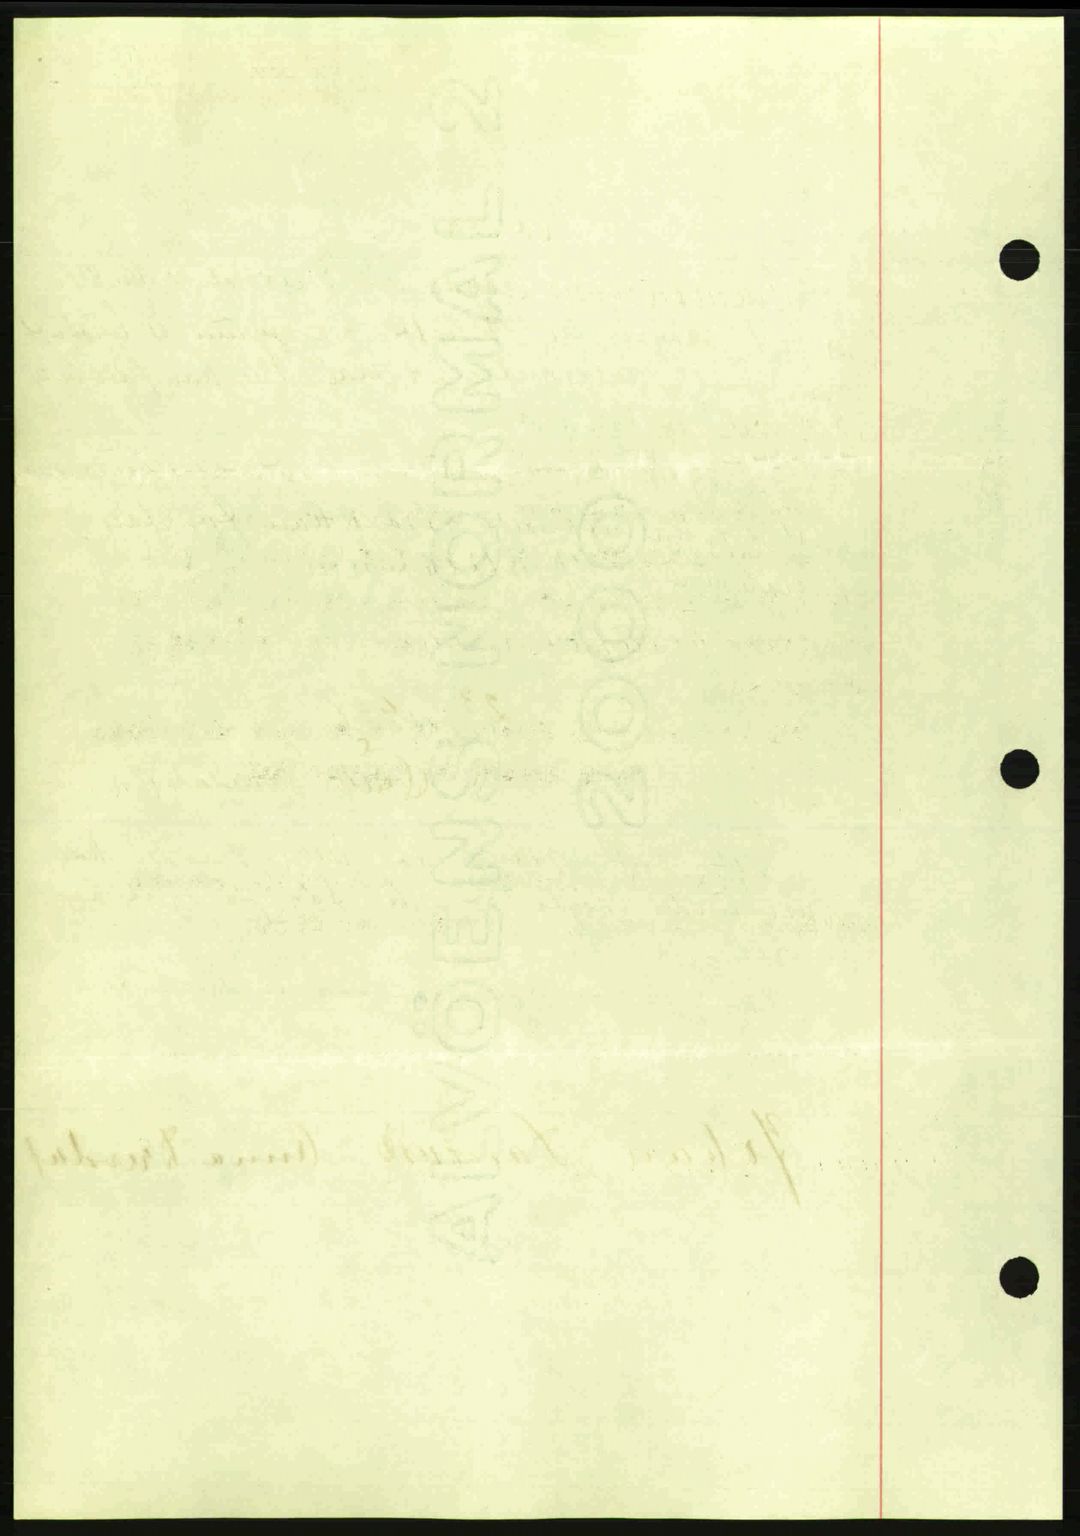 Indre Sogn tingrett, SAB/A-3301/1/G/Gb/Gba/L0030: Mortgage book no. 30, 1935-1937, Deed date: 30.11.1936